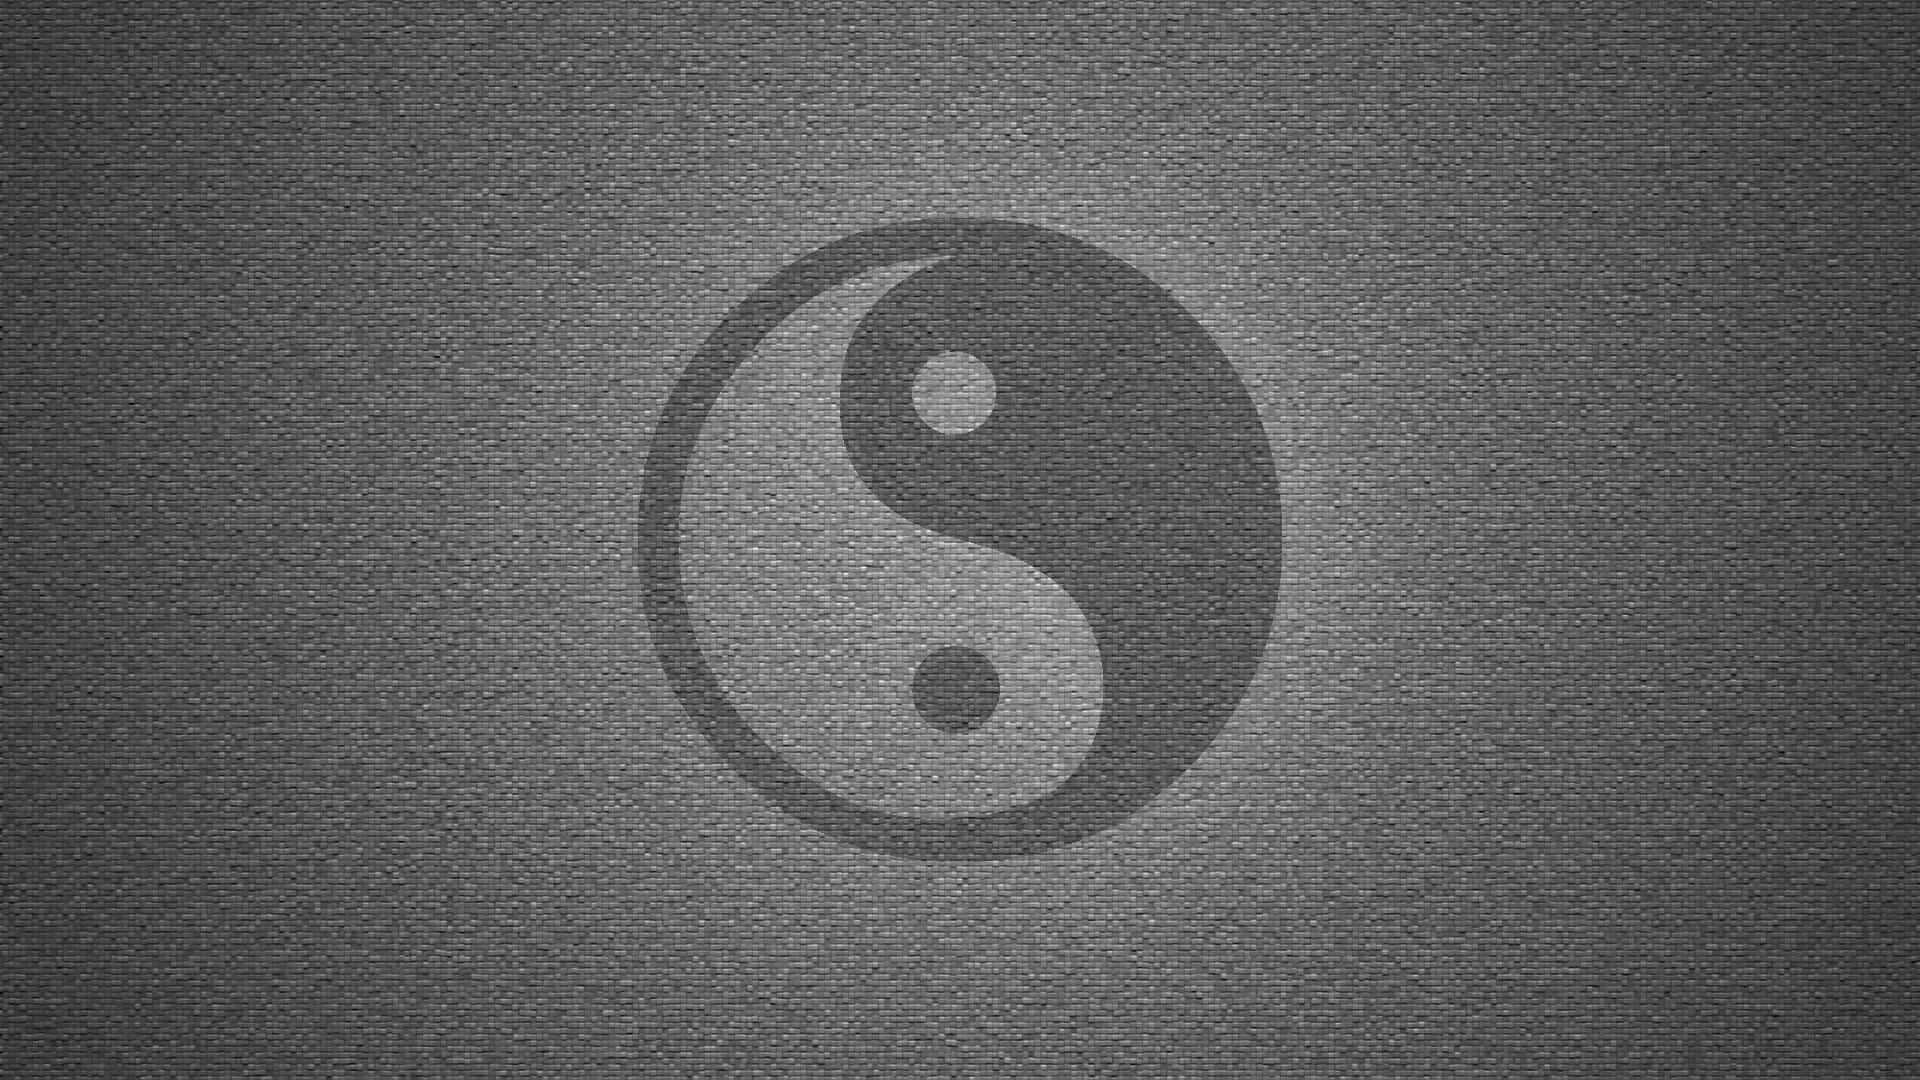 Wallpapers backgrounds black and white kung fu on the desktop